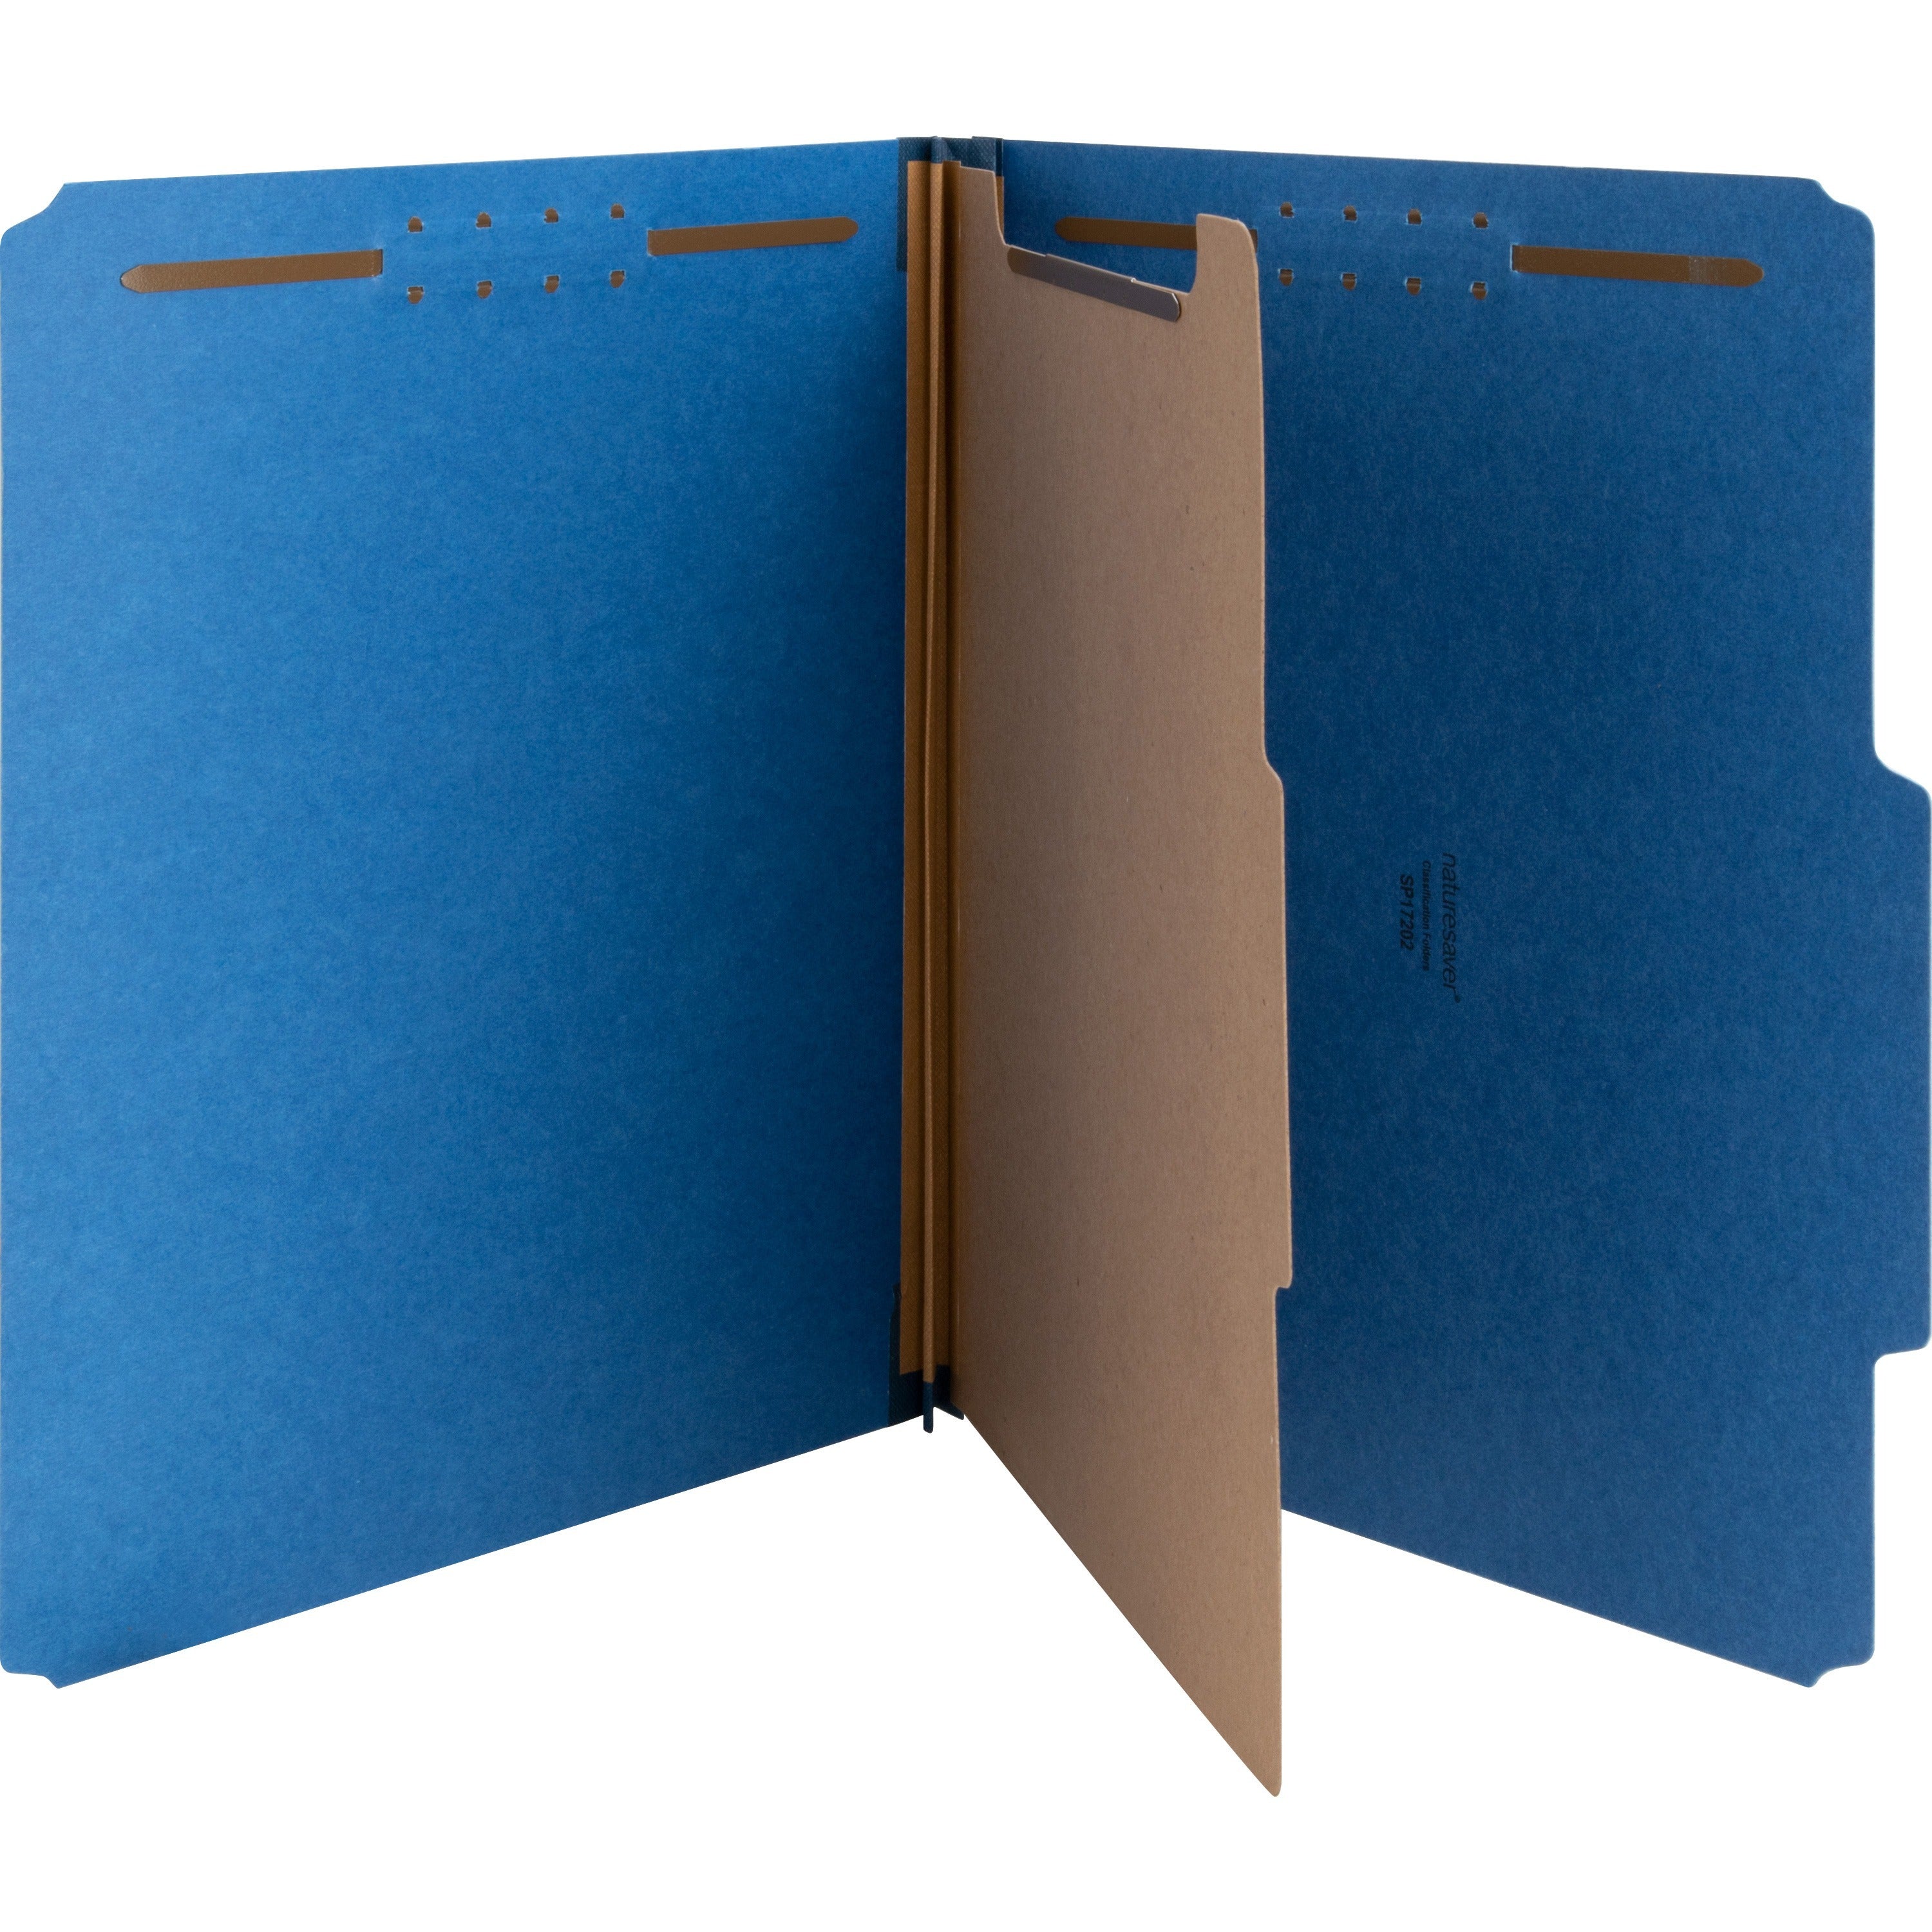 Nature Saver Letter Recycled Classification Folder - 8 1/2" x 11" - 2" Fastener Capacity for Folder - Top Tab Location - 1 Divider(s) - Blue - 100% Recycled - 10 / Box - 